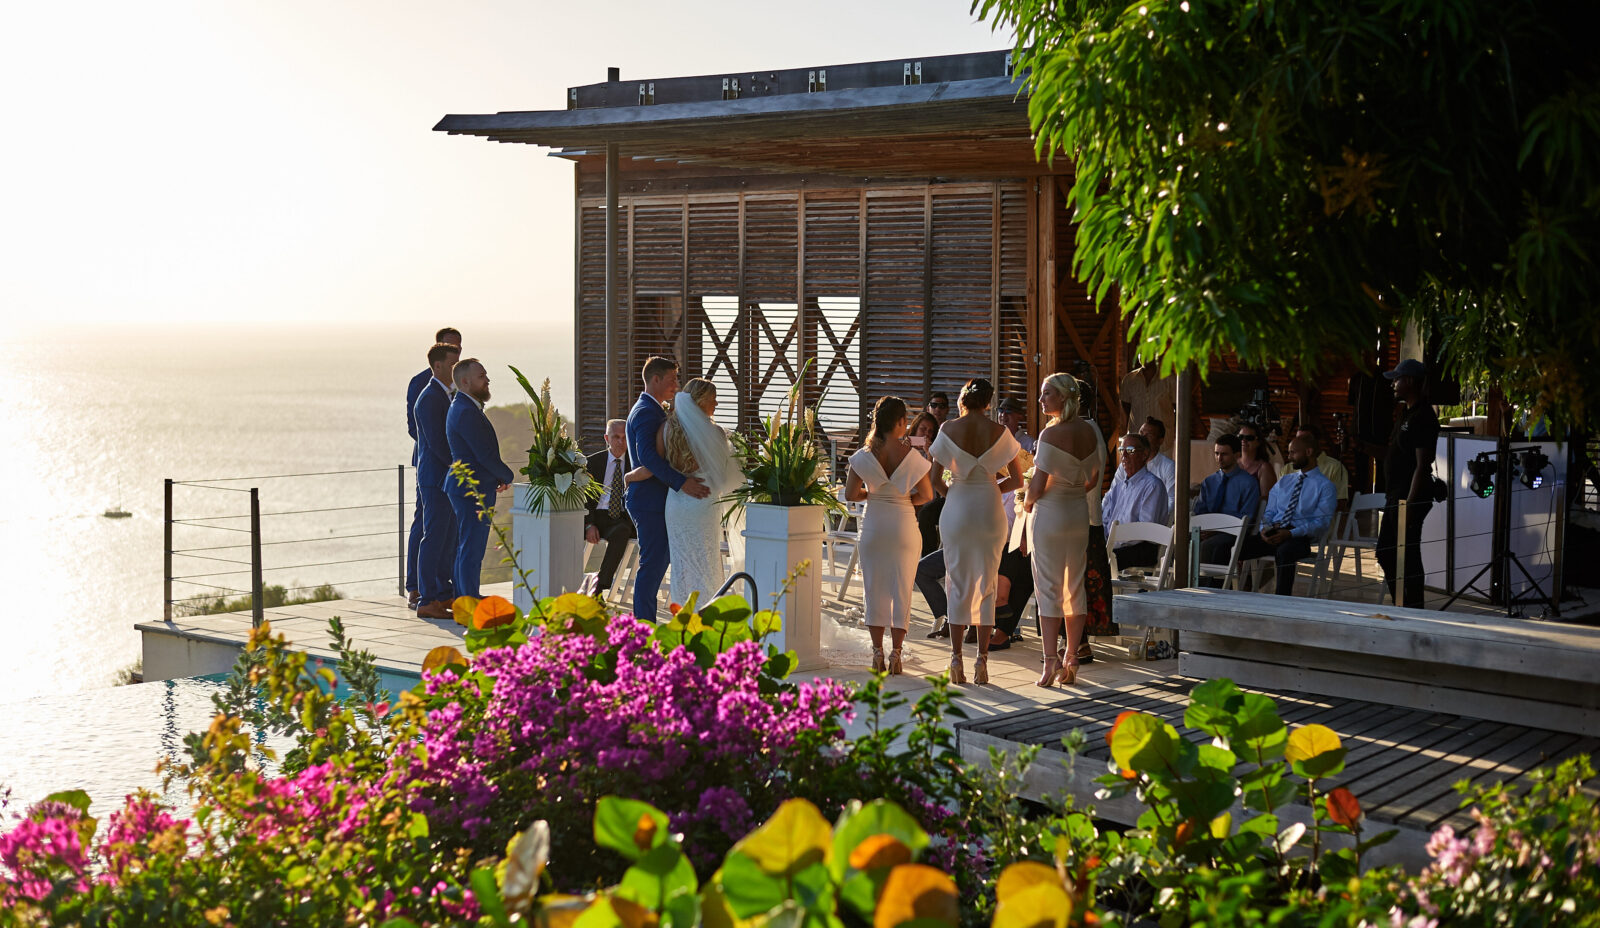 A small wedding ceremony on an outdoor terrace with the Caribbean sea in the background and pink and green garden flowers in the foreground